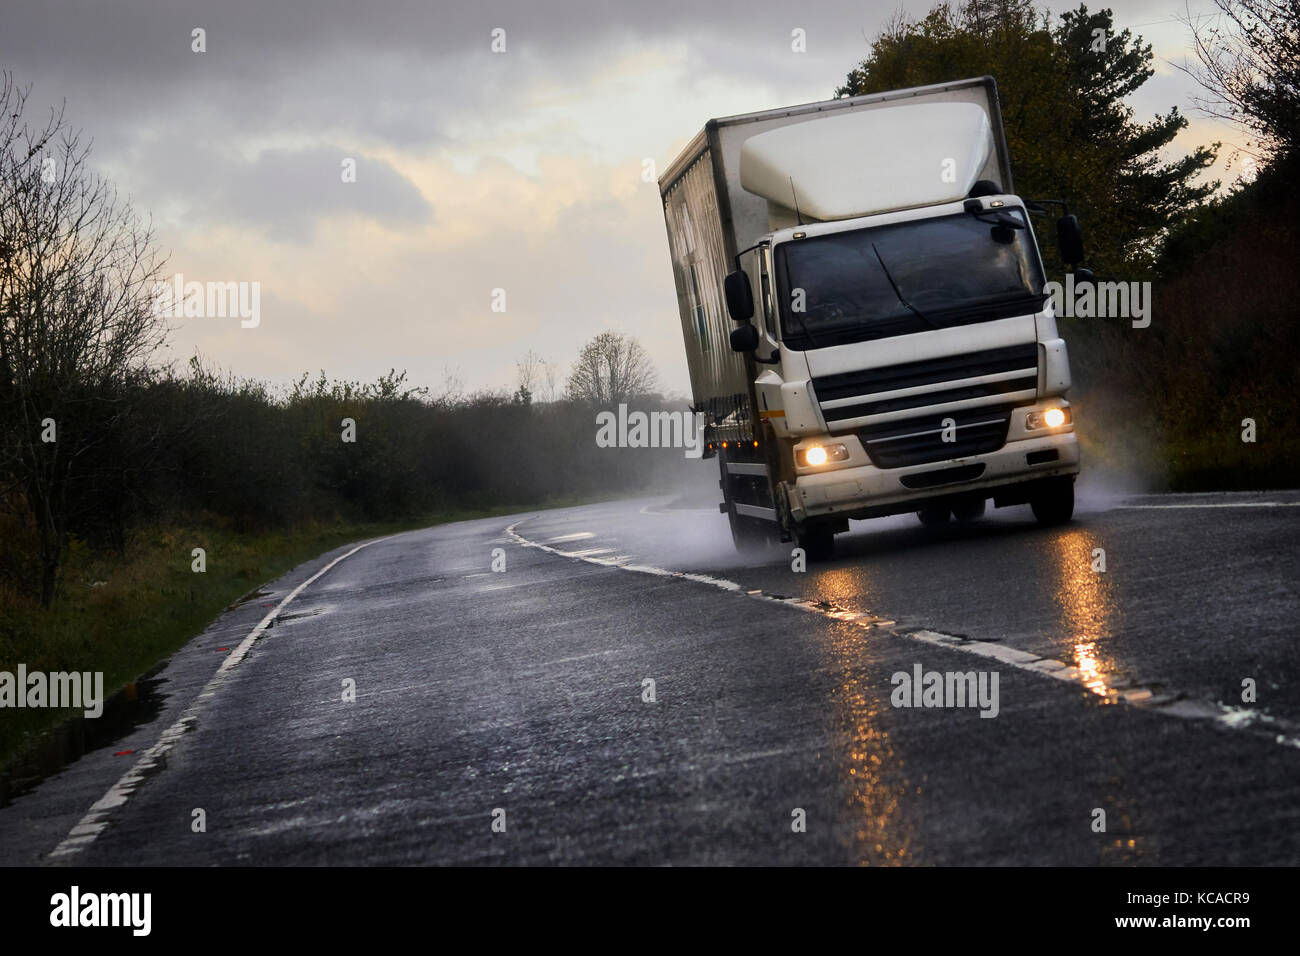 A truck transporting goods along the A1 motorway, England UK. Stock Photo